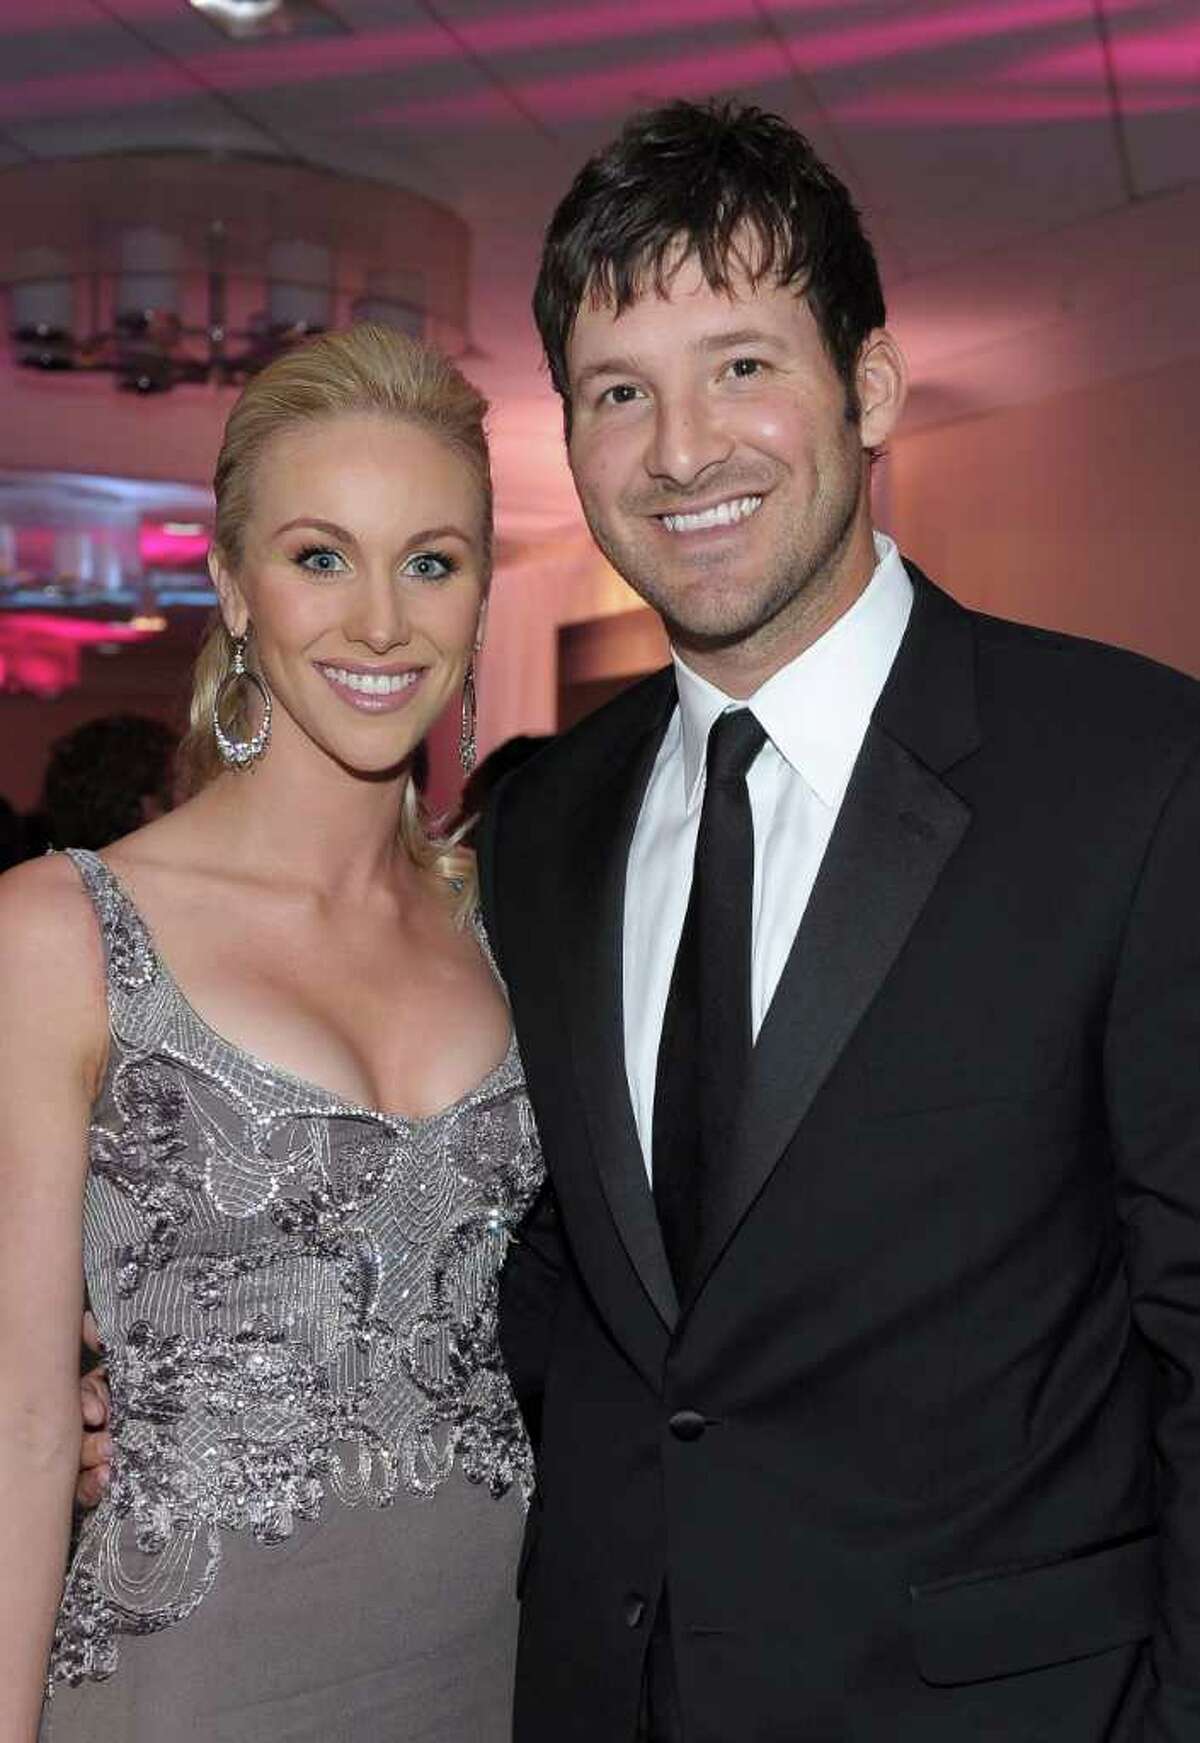 WASHINGTON, DC - APRIL 30: Candice Crawford and NFL player Tony Romo of the Dallas Cowboys attend the TIME/CNN/People/Fortune White House Correspondents' dinner cocktail party at the Washington Hilton on April 30, 2011 in Washington, DC. (Photo by Michael Loccisano/Getty Images for Time Warner) *** Local Caption *** Candice Crawford;Tony Romo;